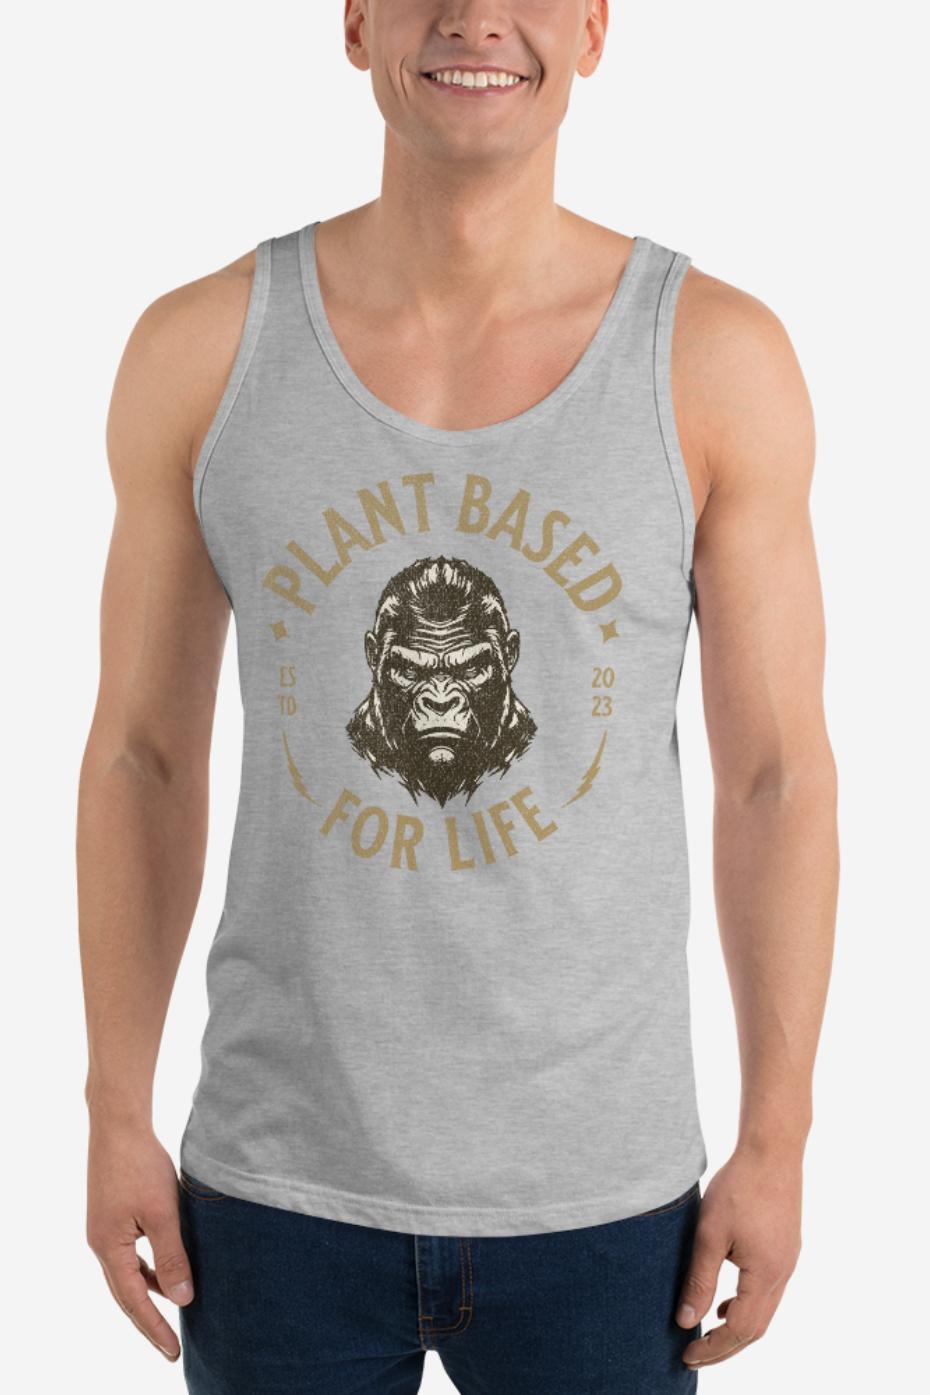 Plant Based For Life - Unisex Tank Top